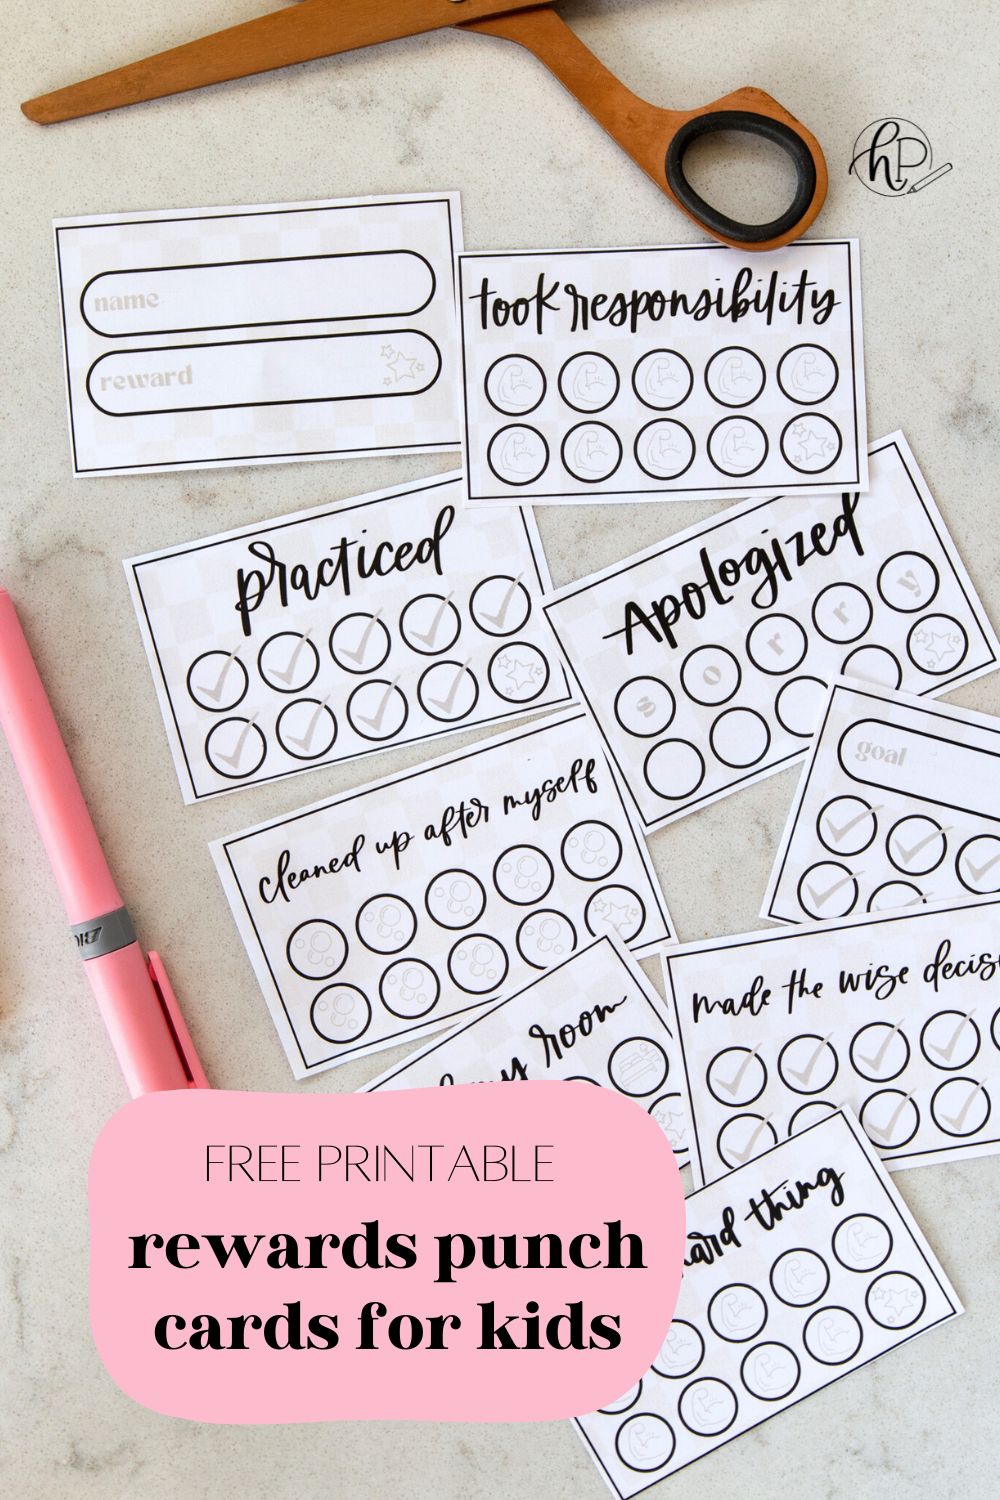 image of printed punch cards for kids, cut to size with scissors punch cards have a soft checkerboard background with hand lettered goals like 'practiced', 'took responsibility', 'apologized', 'cleaned up after myself' and 'made the wise decision'